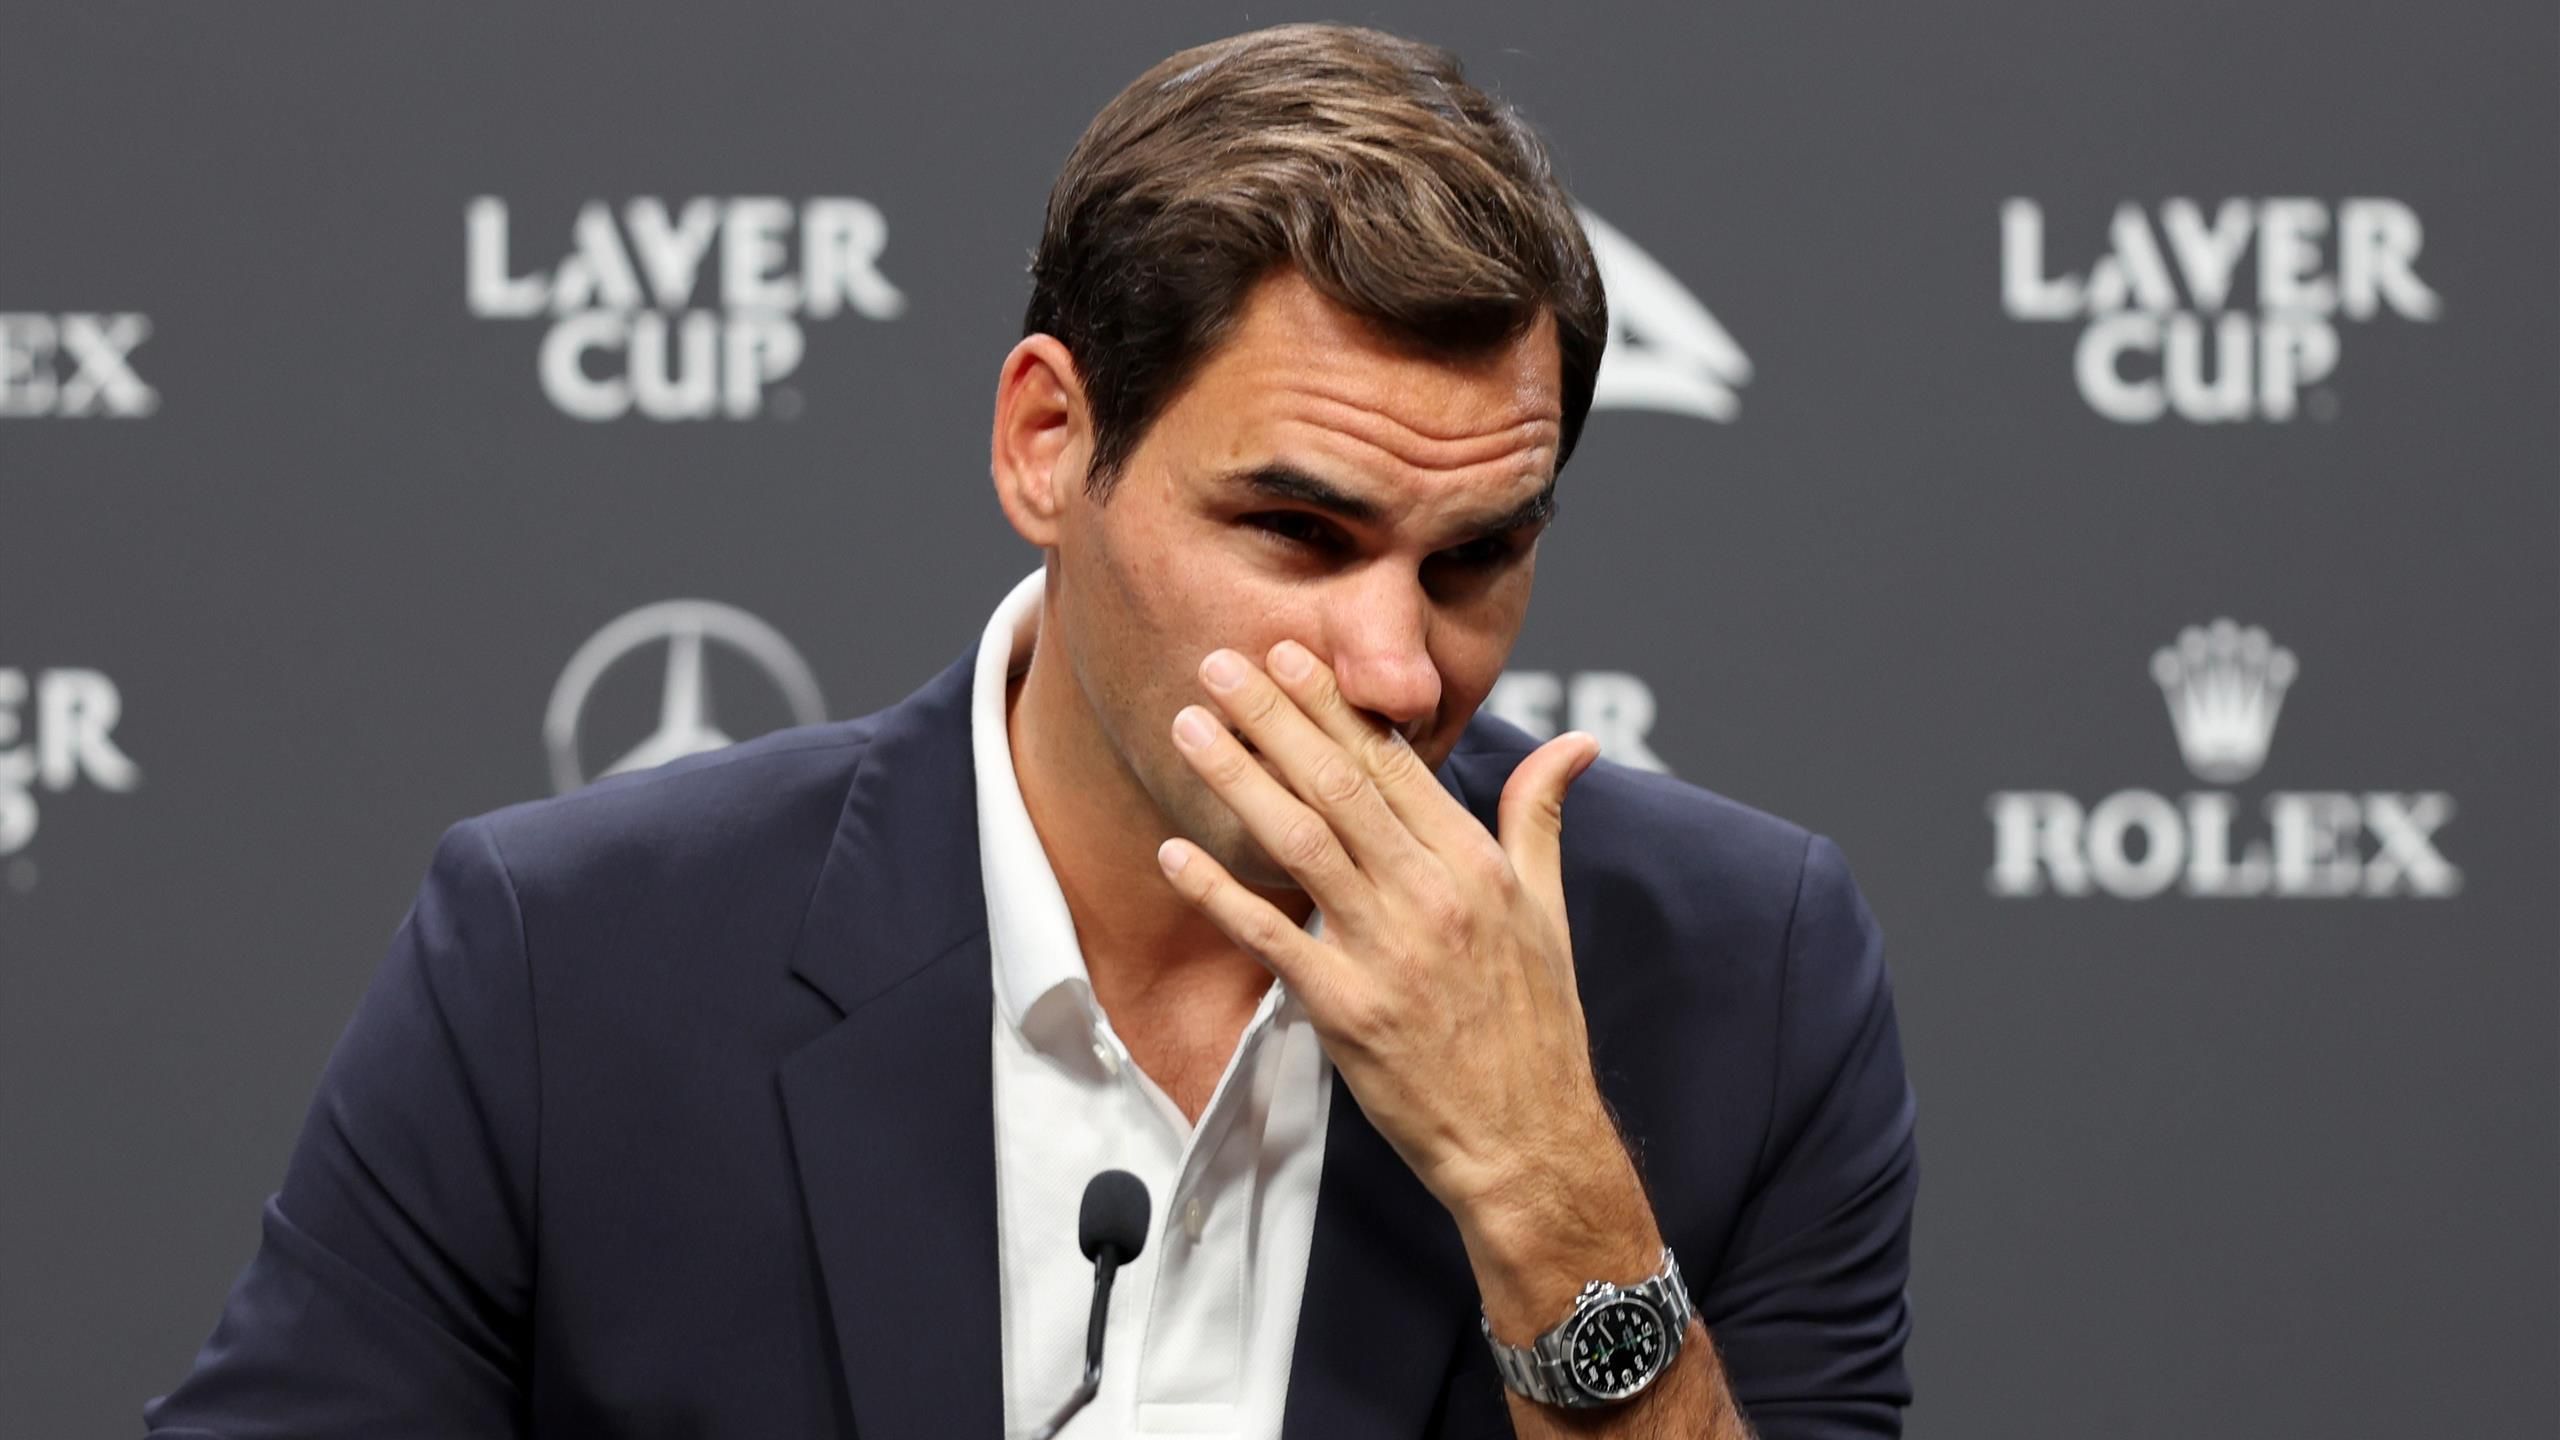 I wont be a ghost - Roger Federer insists he will remain part of tennis world after retirement